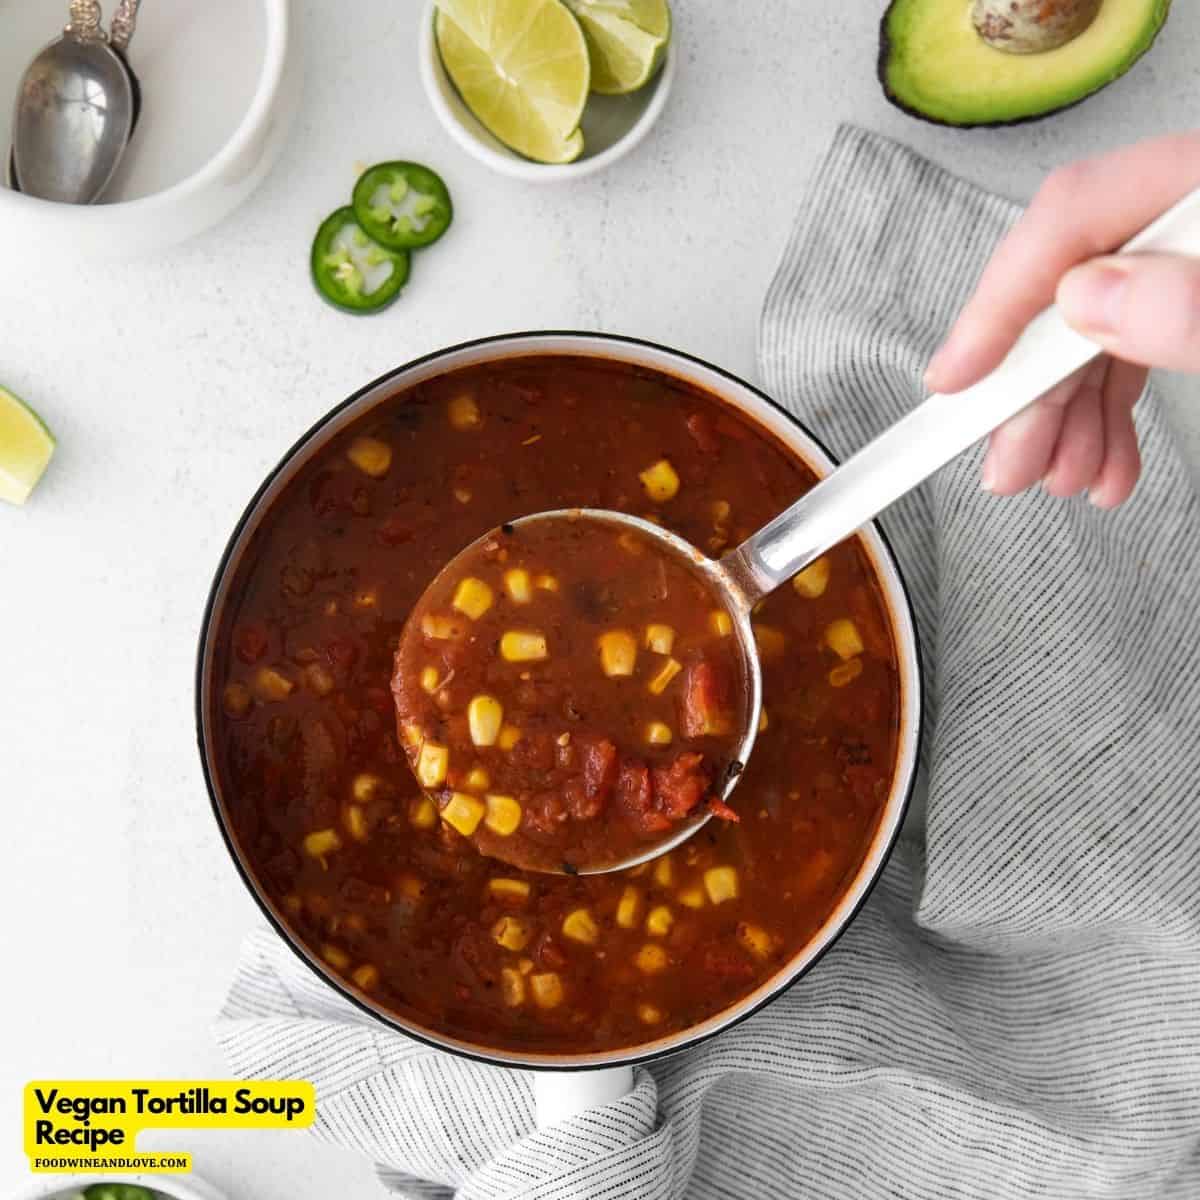 Vegan Tortilla Soup Recipe, a simple and deliciously filling recipe made in one pot with healthy vegetables and no dairy.